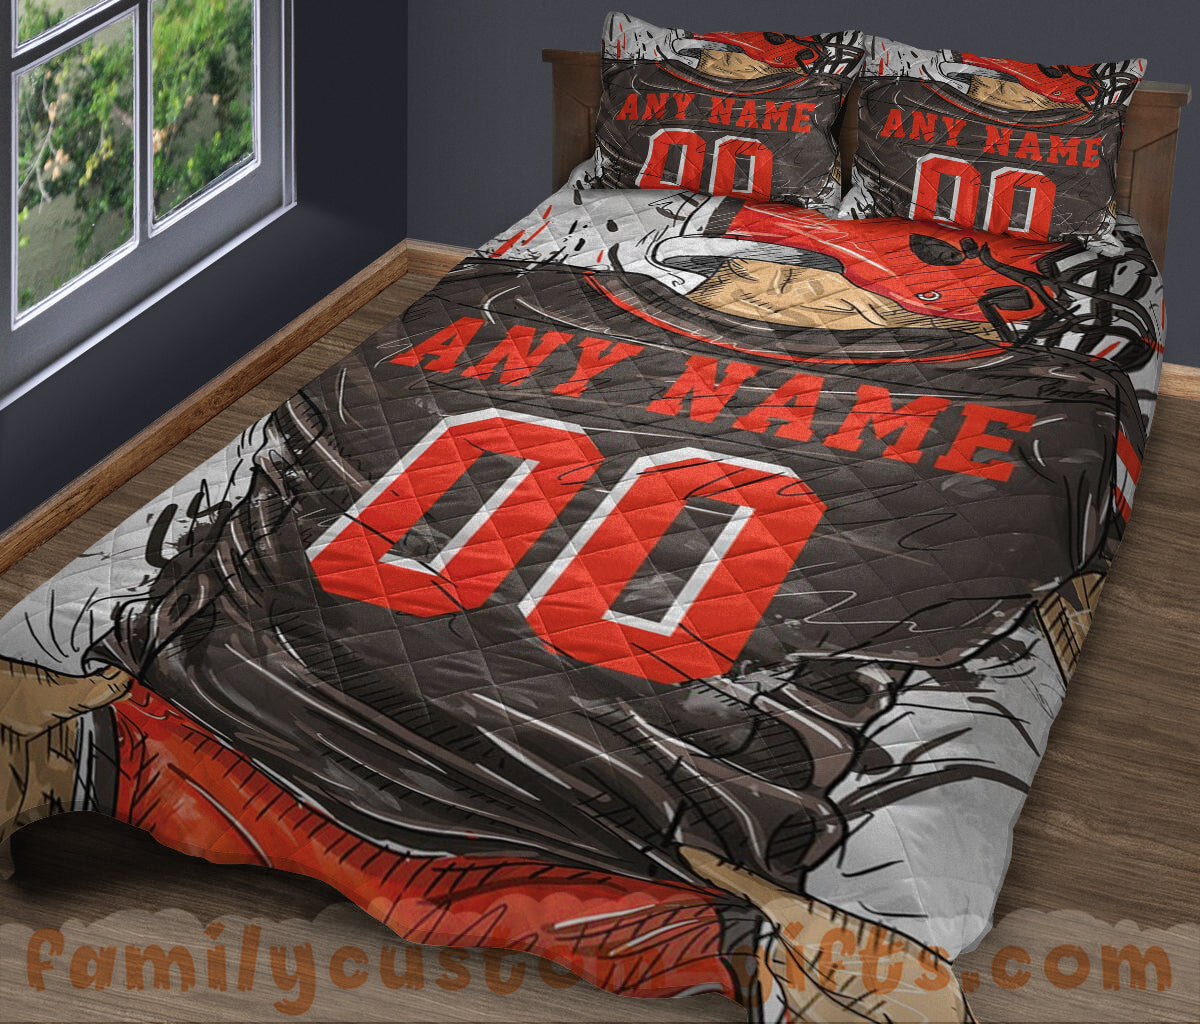 Custom Quilt Sets Cleveland Jersey Personalized Football Premium Quilt Bedding for Men Women